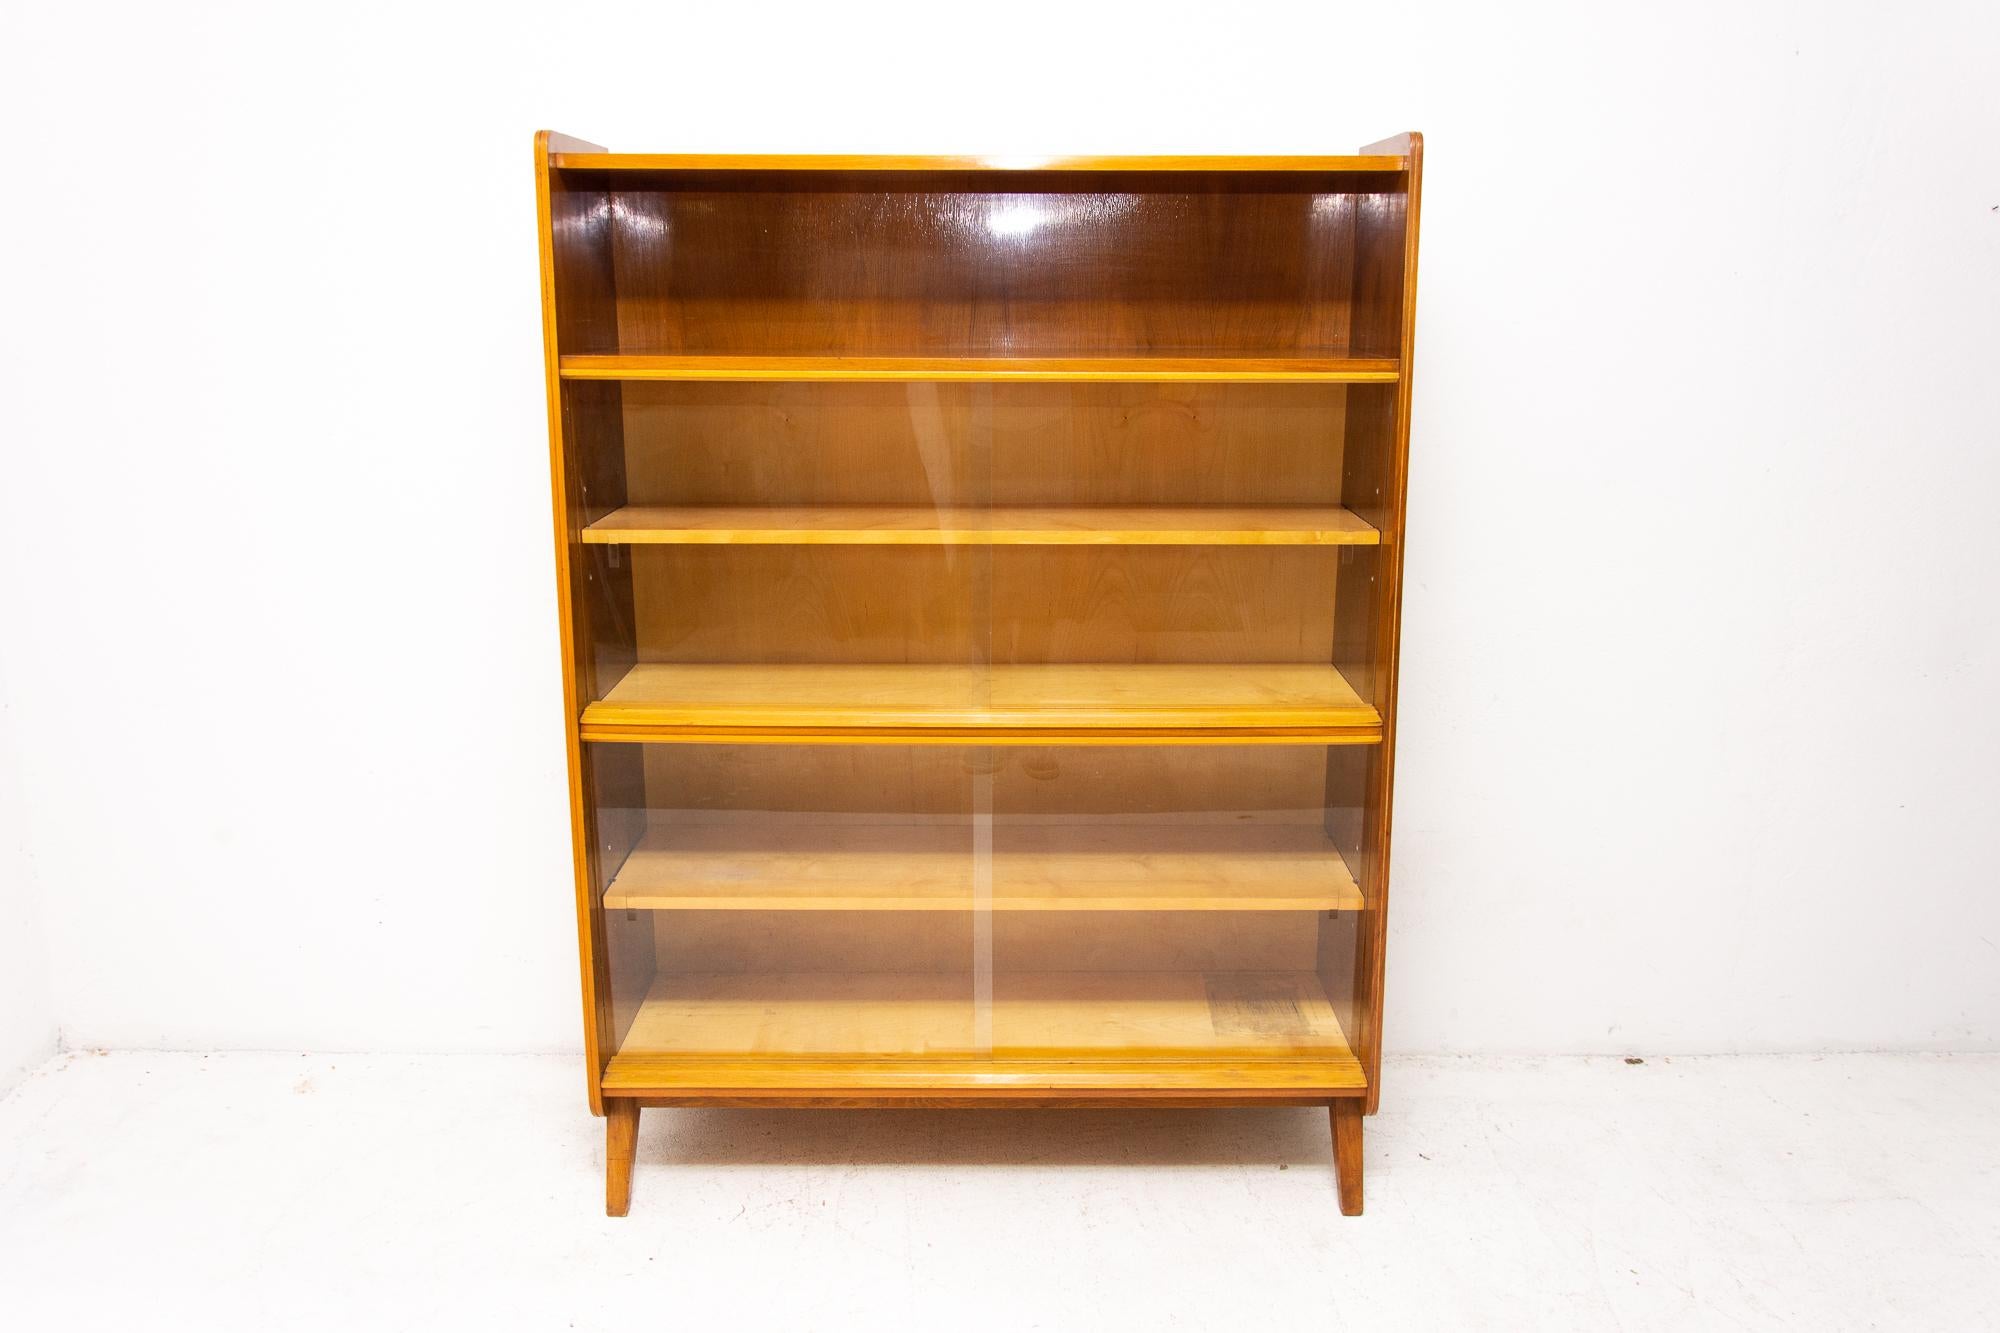 Midcentury vintage bookcase from the 1960s. It was designed by František Jirák and was manufactured by Tatra Nábytok Company in the former Czechoslovakia. Features a simple design, a glazed section with five storage spaces. In very good condition.